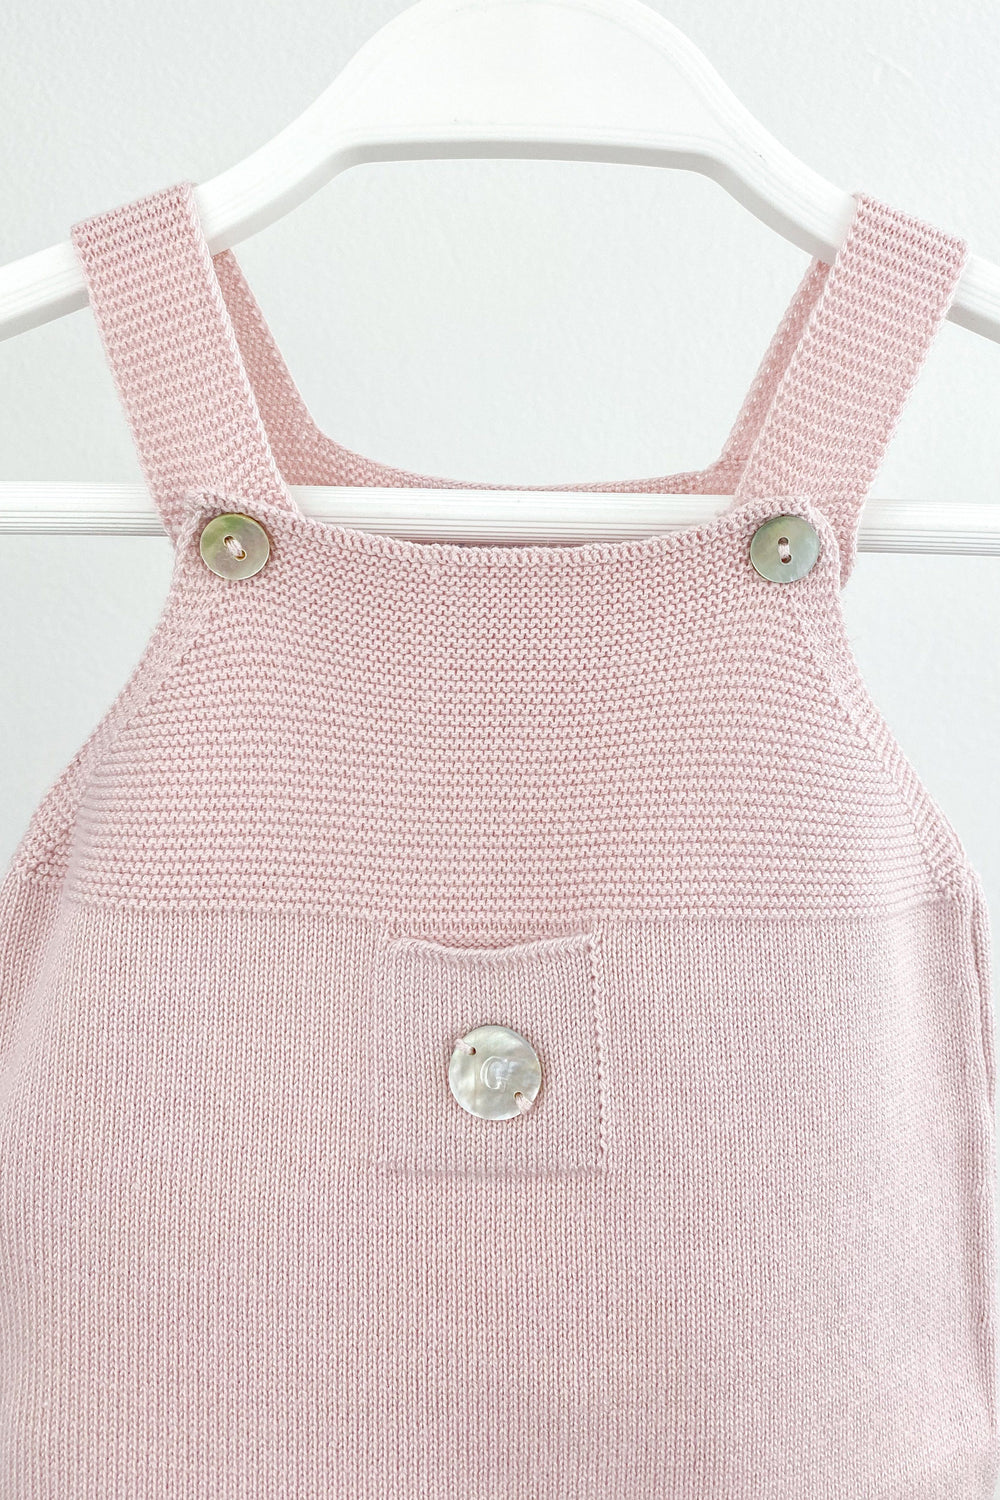 Granlei Classic Knitted Dungarees - Pale Rose | Millie and John